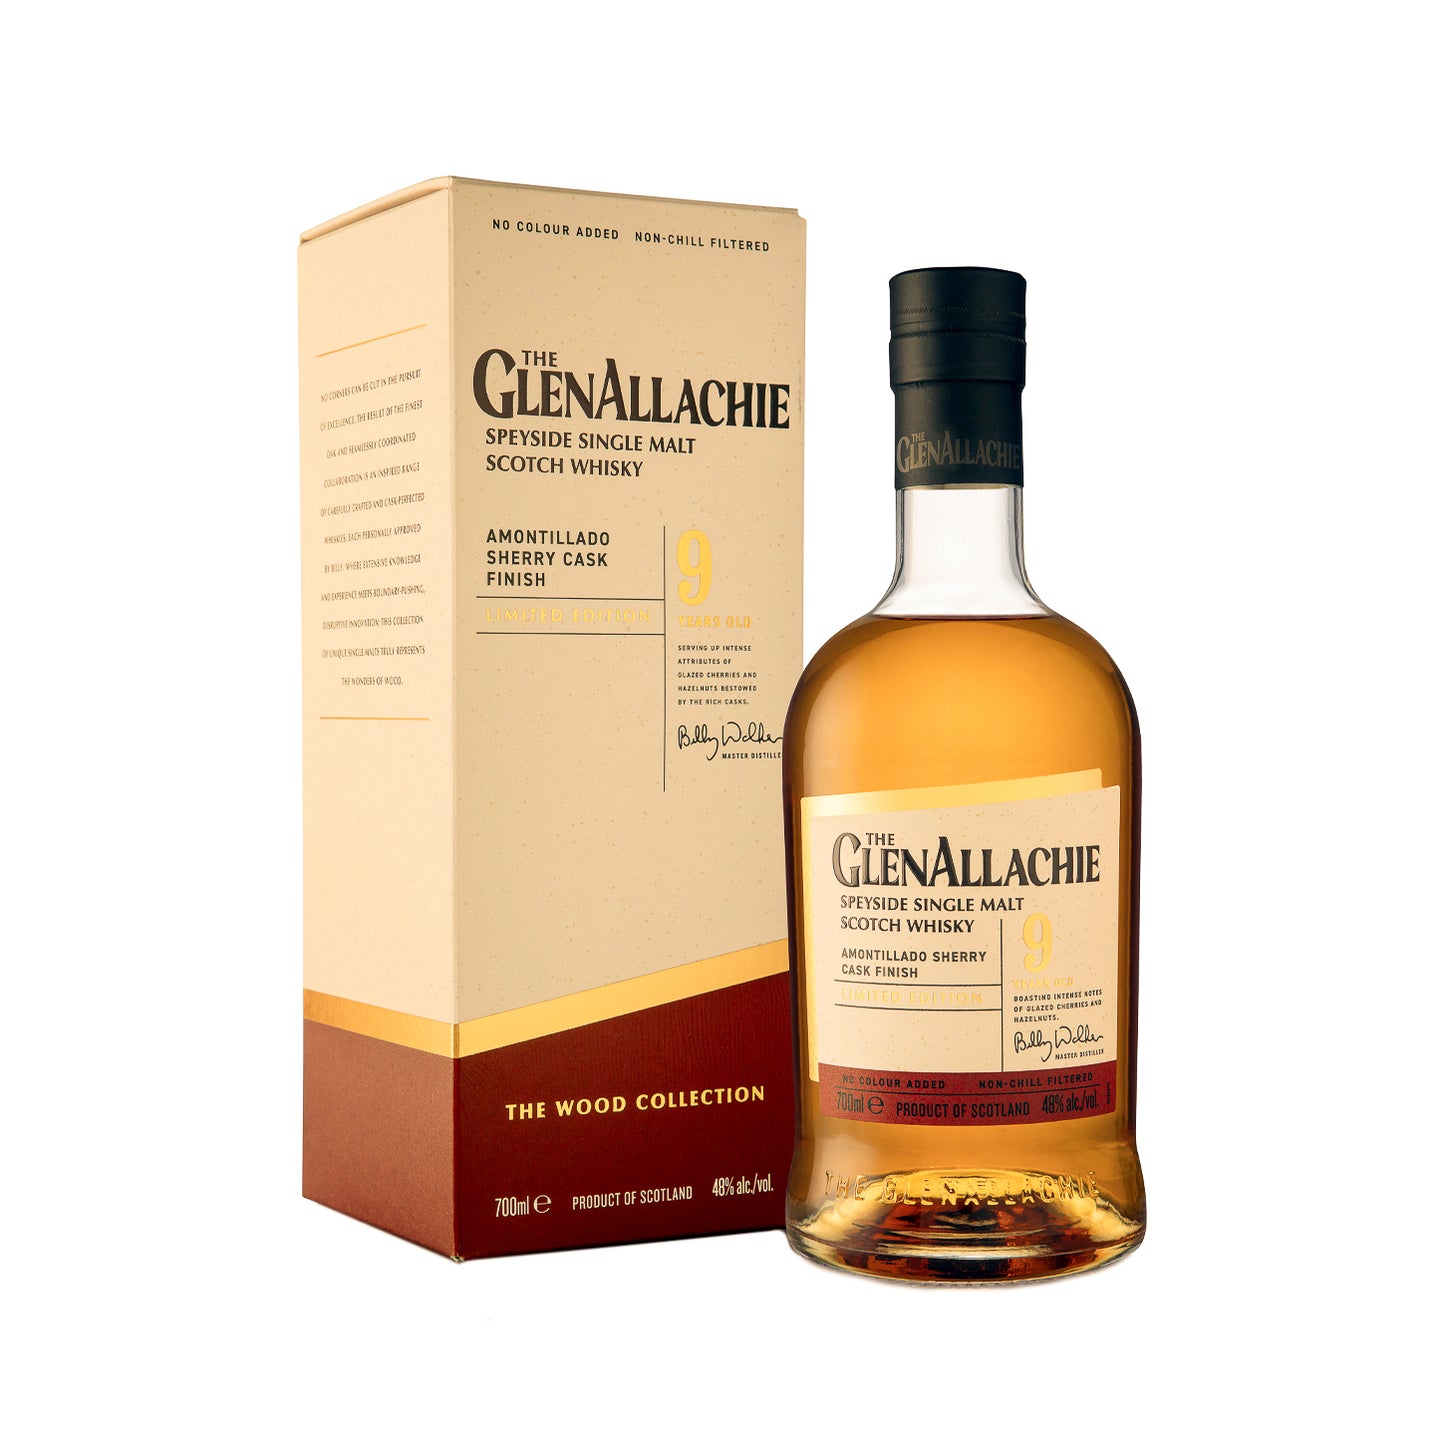 Glenallachie 9 Years Wood Collection: Amontillado Sherry Cask